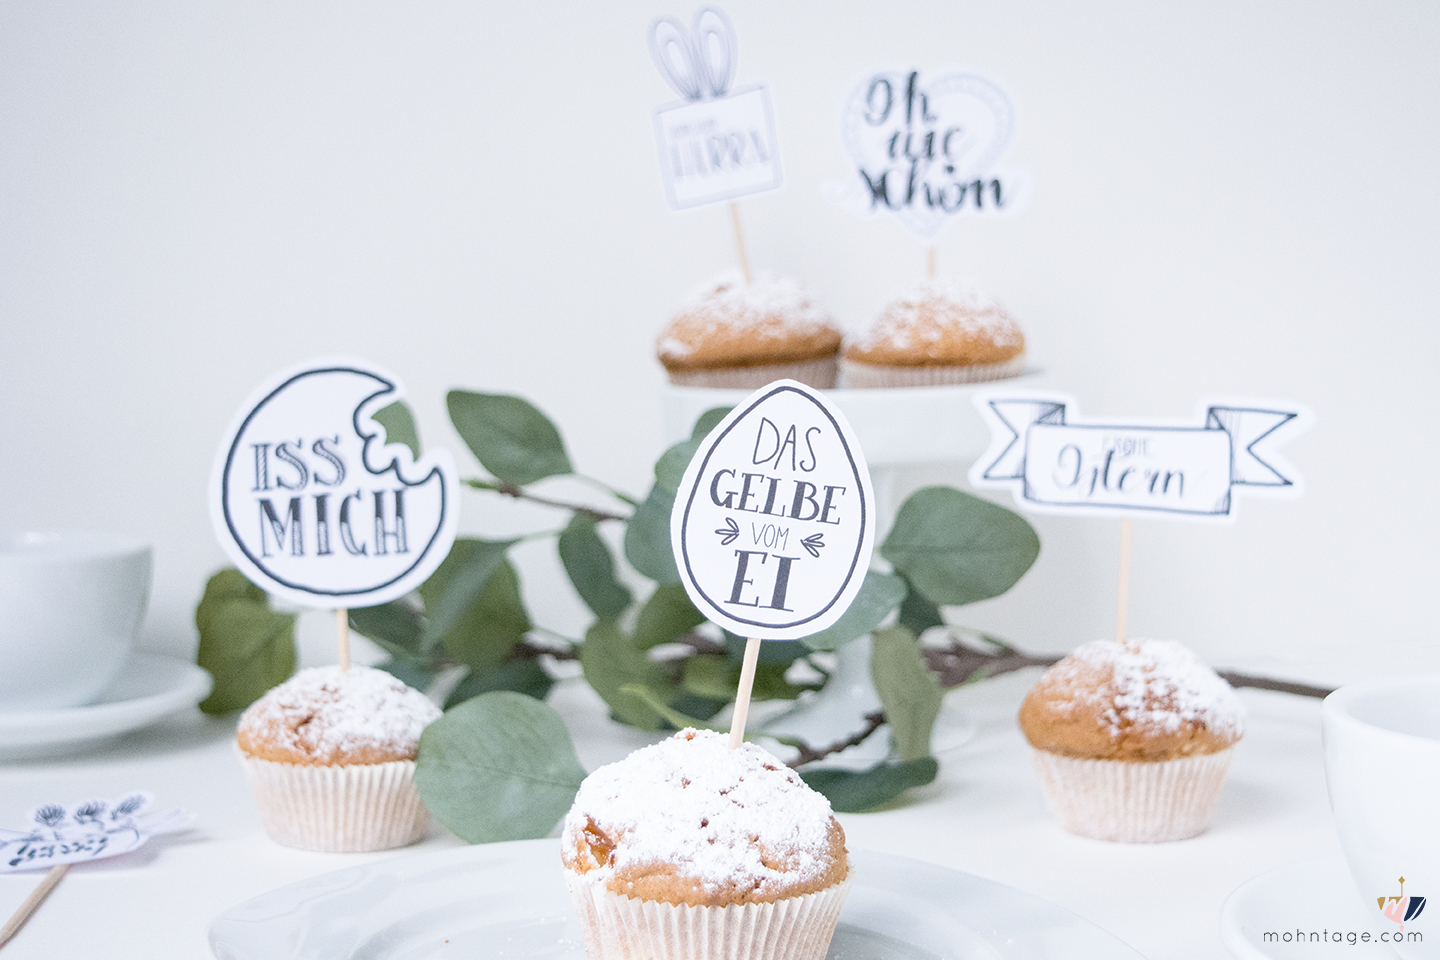 DIY fun hand lettering cupcake toppers for Easter (via www.mohntage.com)